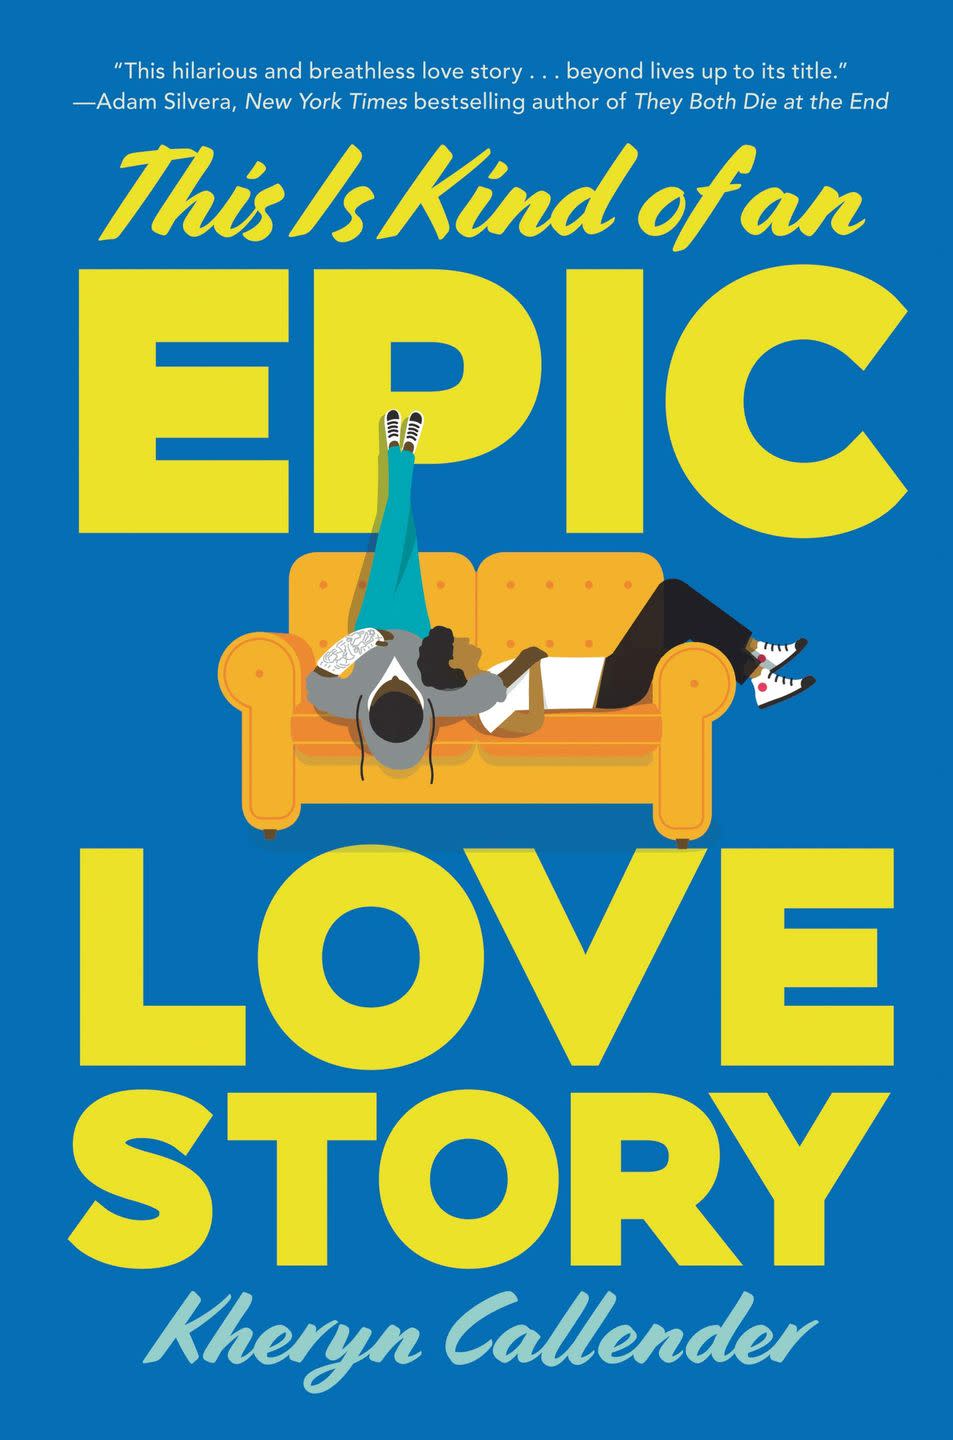 37) “This Is Kind of An Epic Love Story” by Kacen Callender